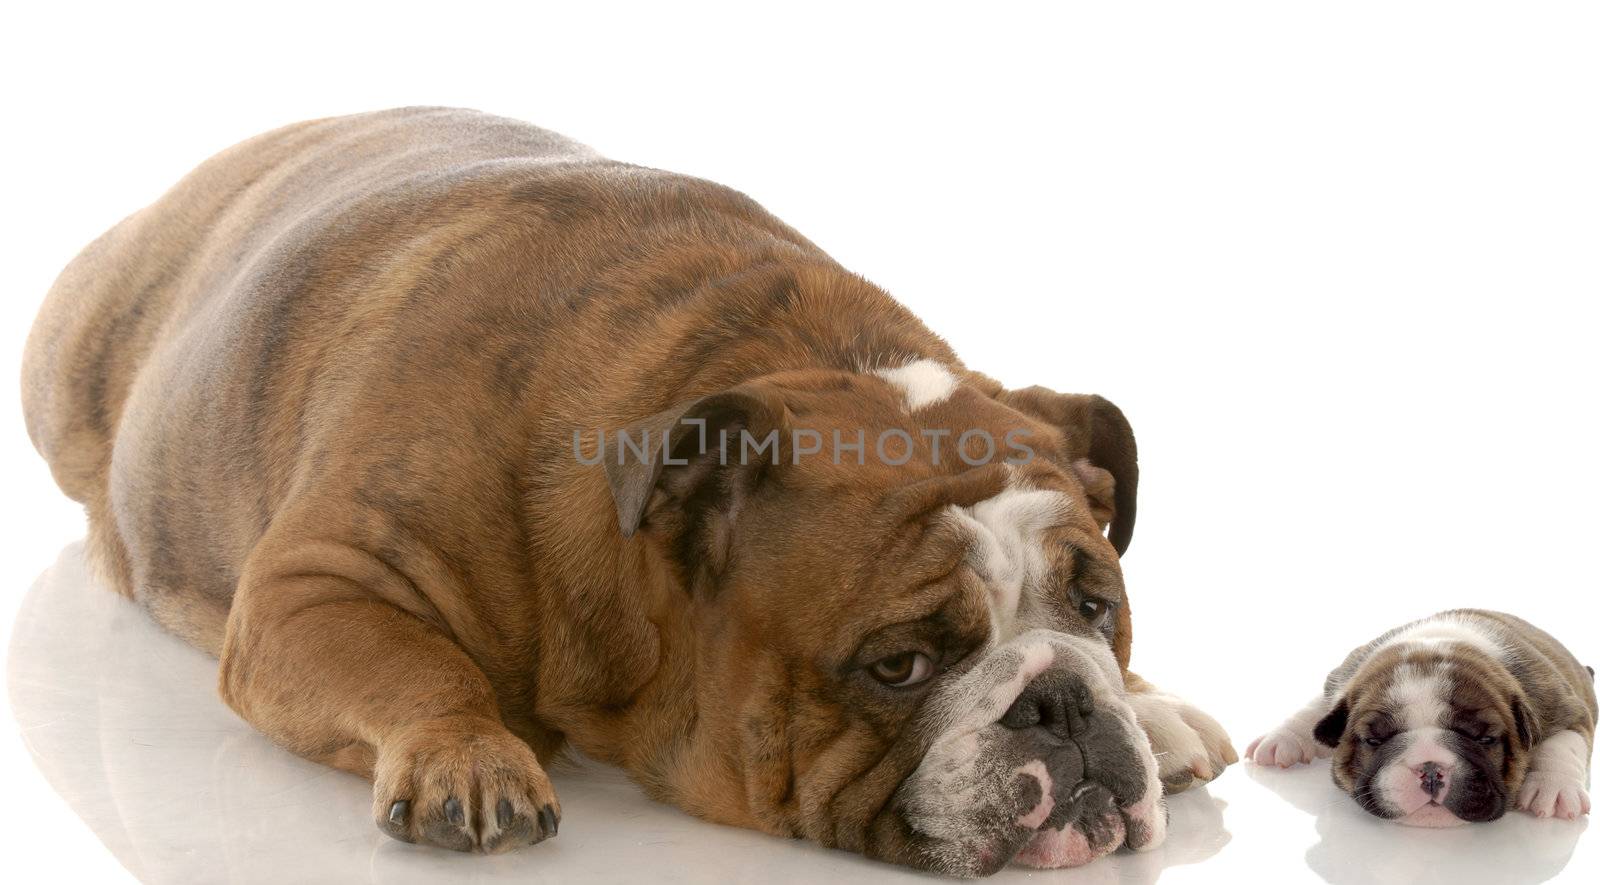 english bulldog mother and three week old puppy with reflection on white background